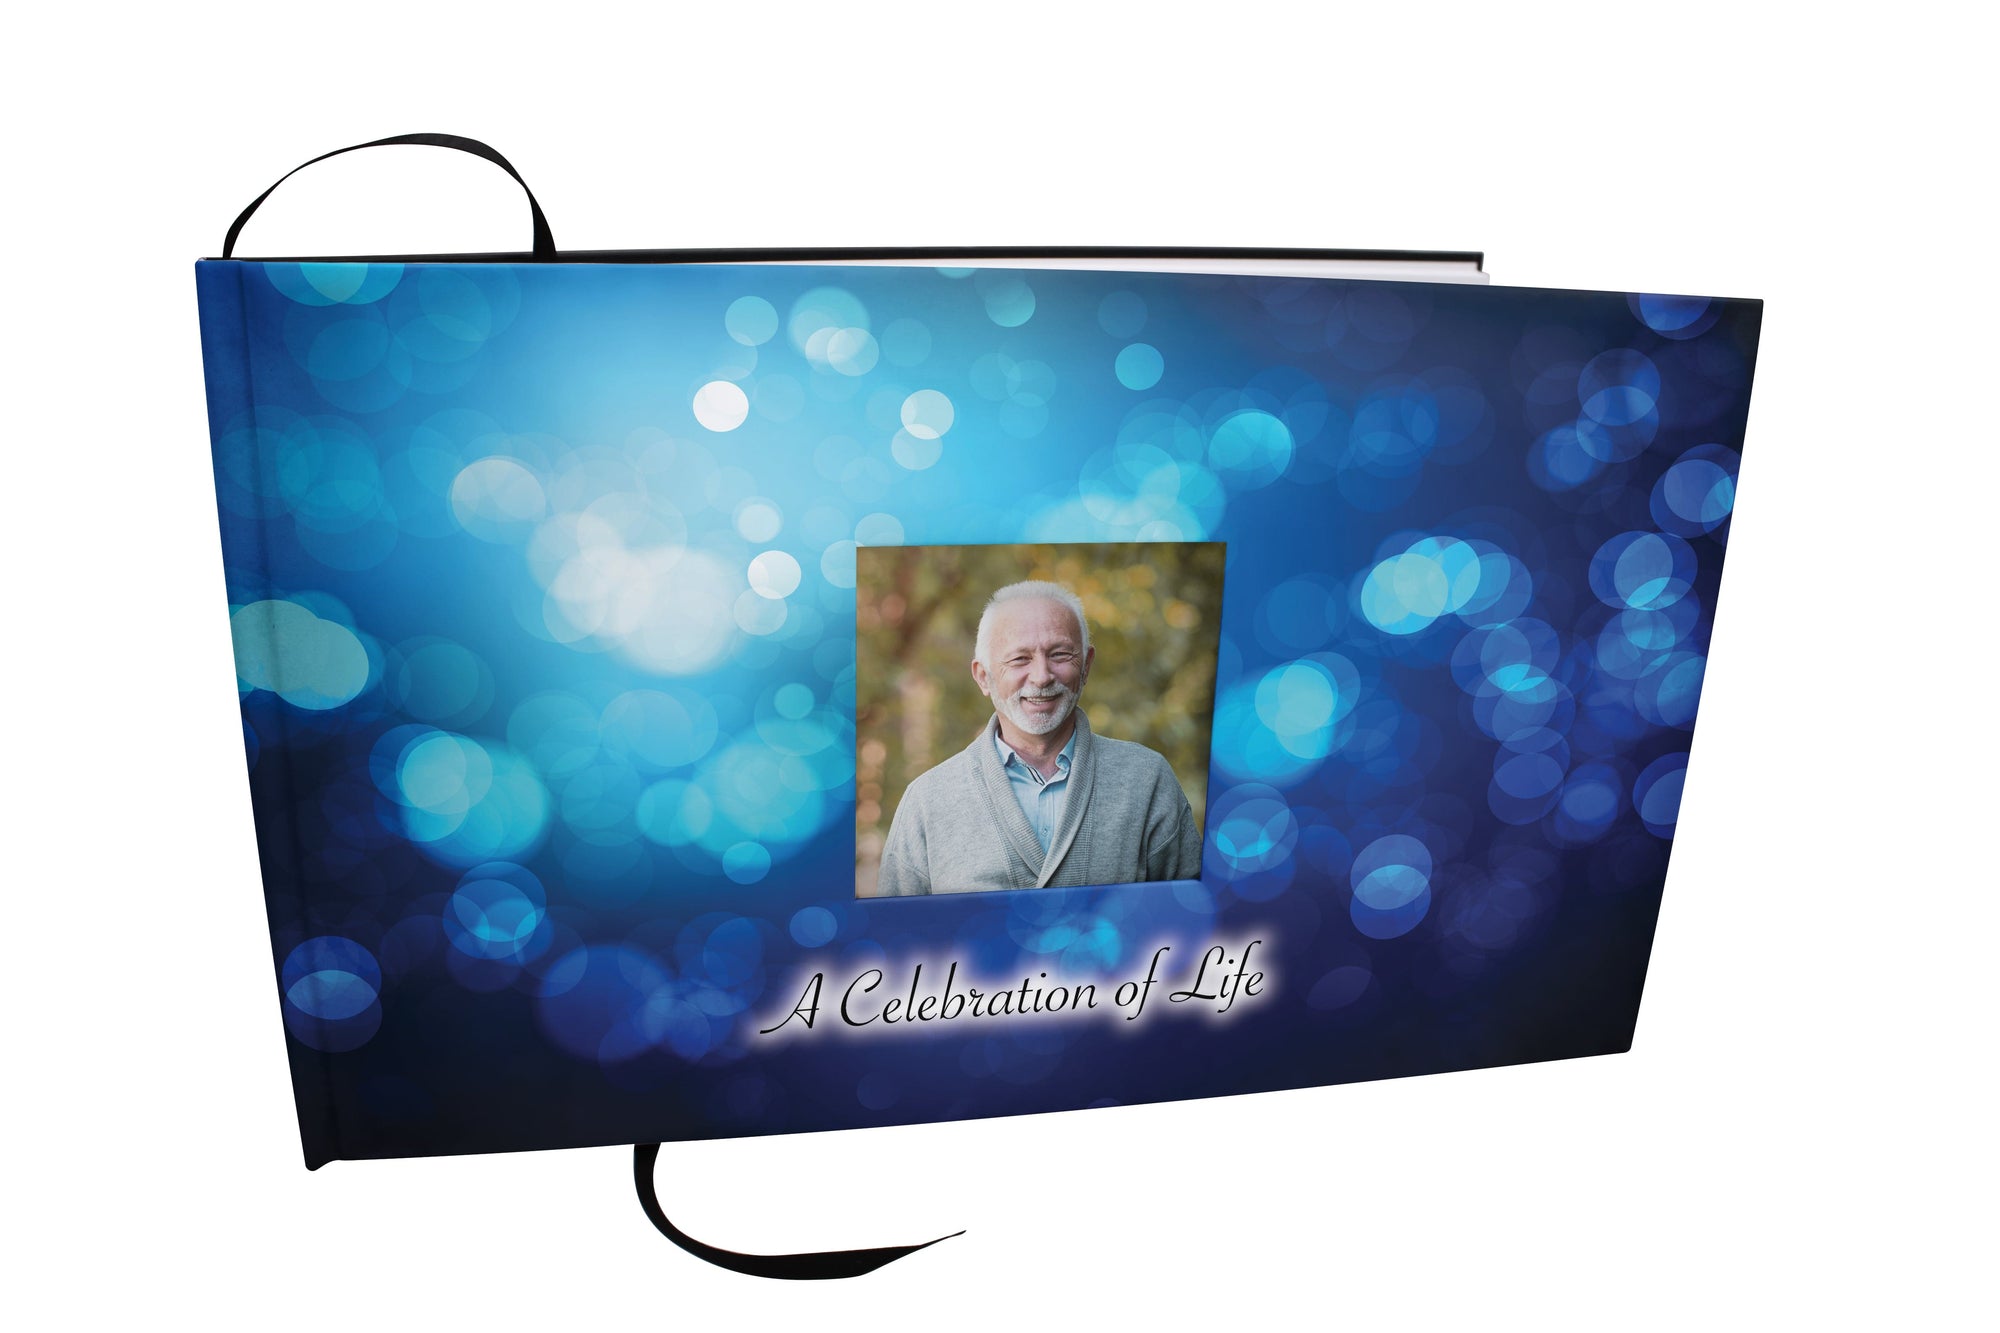 Commemorative Cremation Urns Moonstone Blue Matching Themed 'Celebration of Life' Guest Book for Funeral or Memorial Service